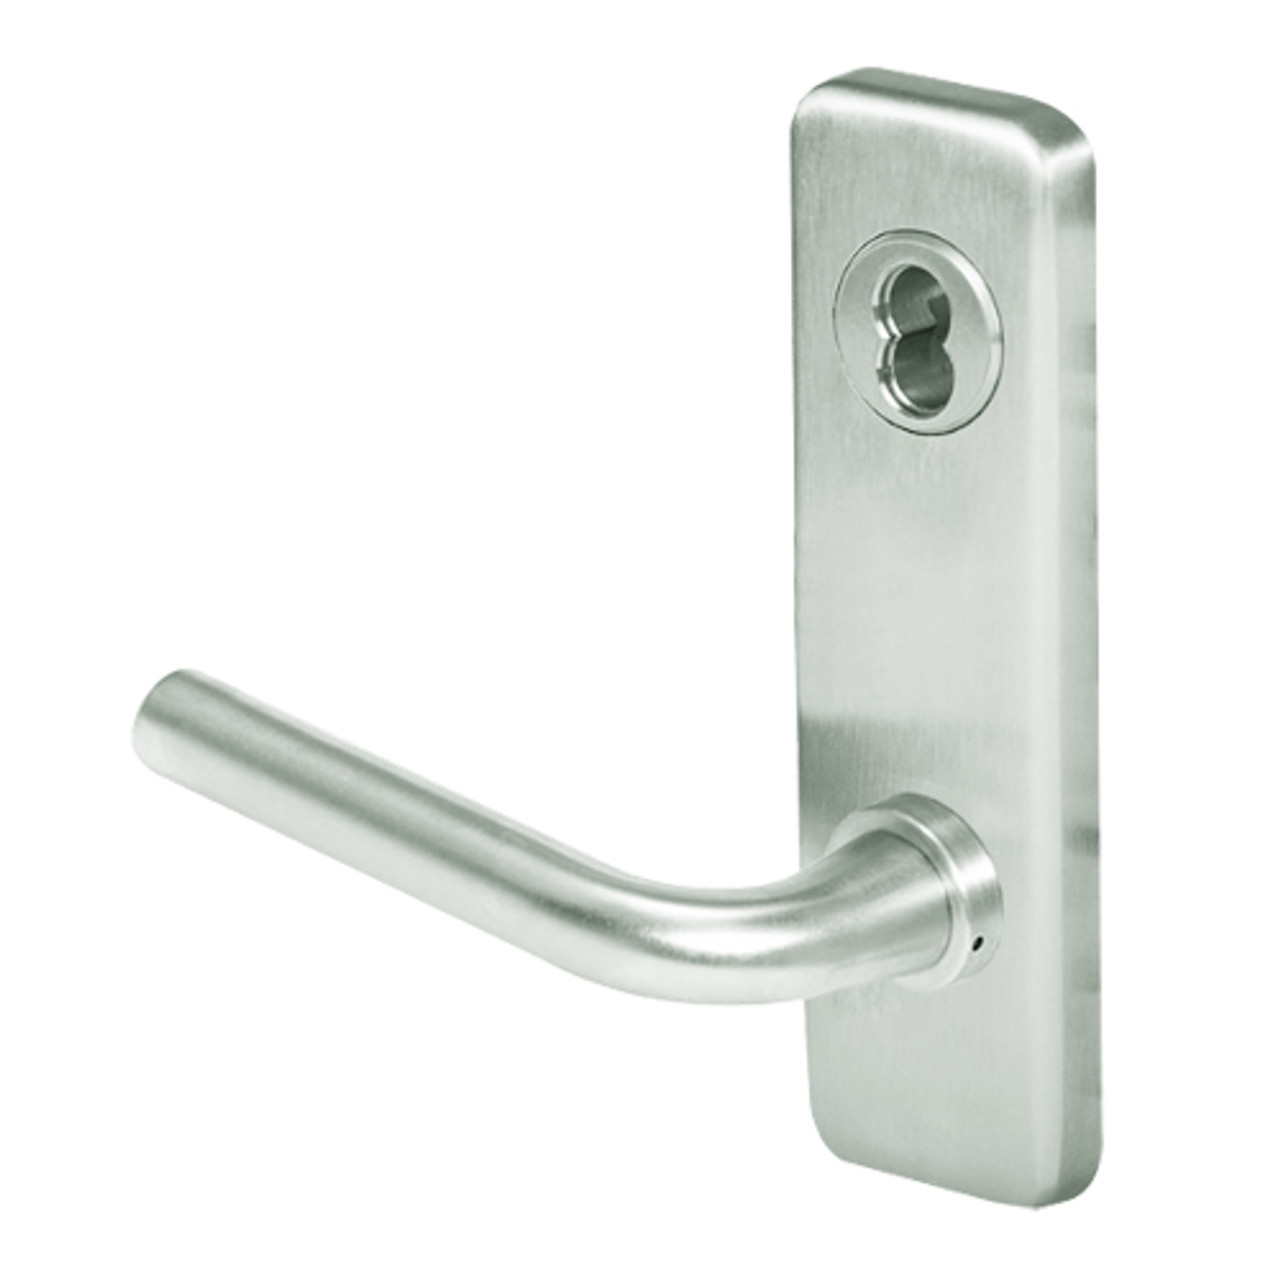 45H0NX12J618 Best 40H Series Exit Function Heavy Duty Mortise Lever Lock with Solid Tube with No Return in Bright Nickel